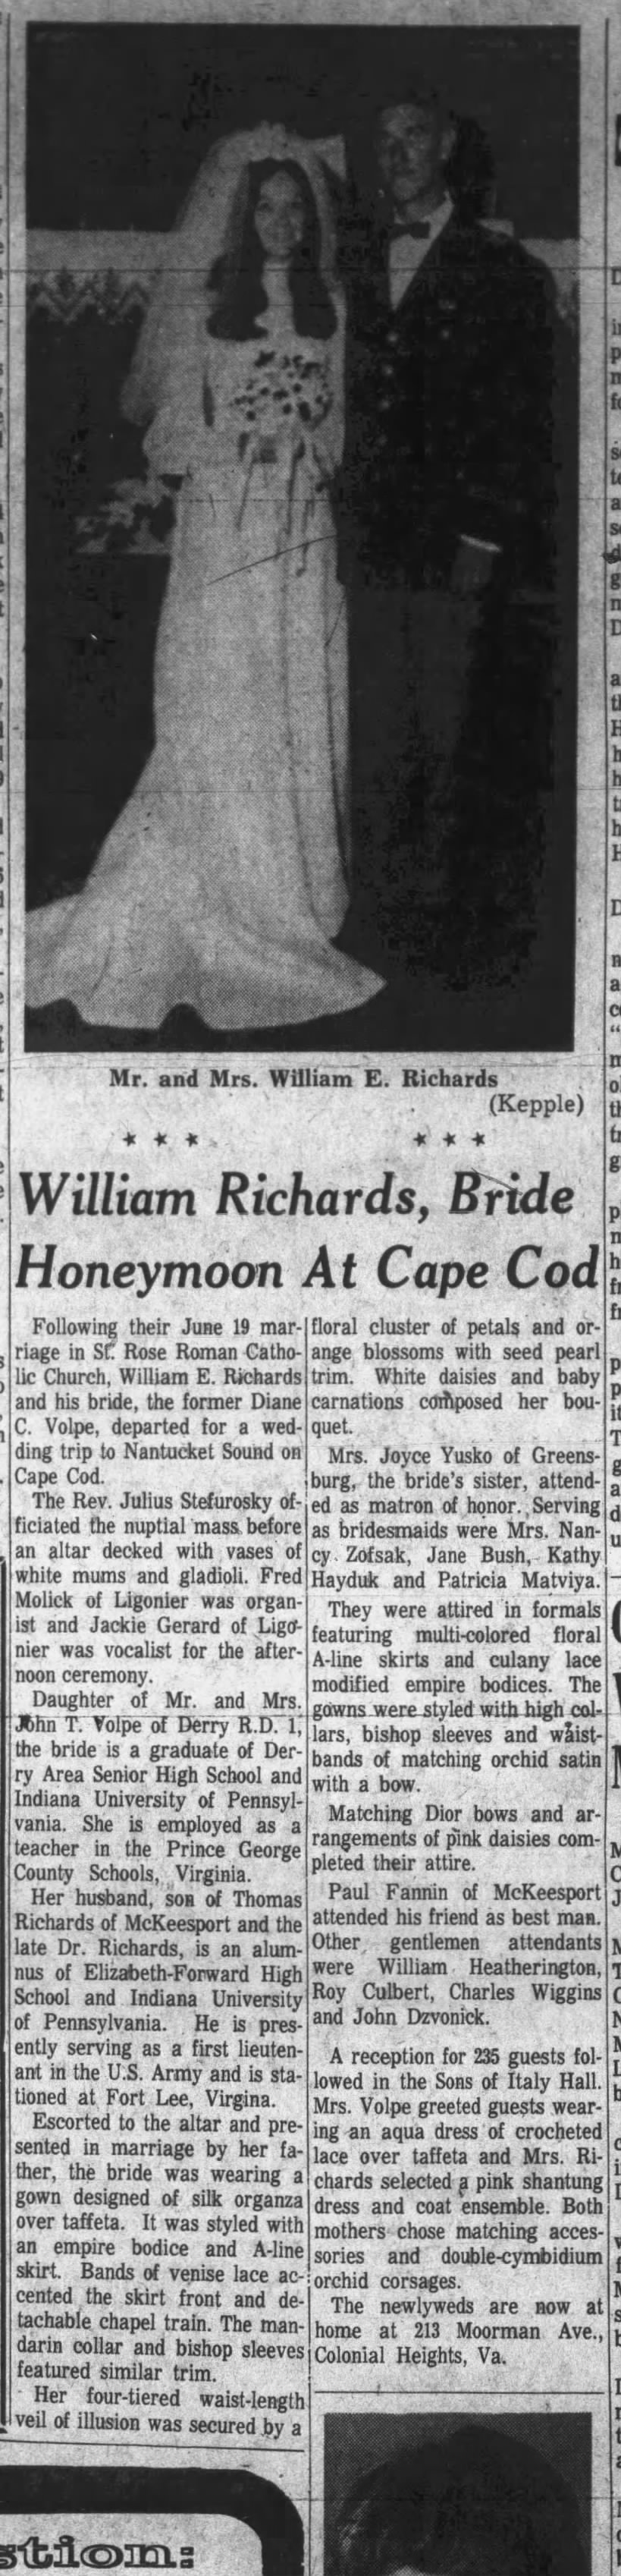 Richards and Volpe marry.